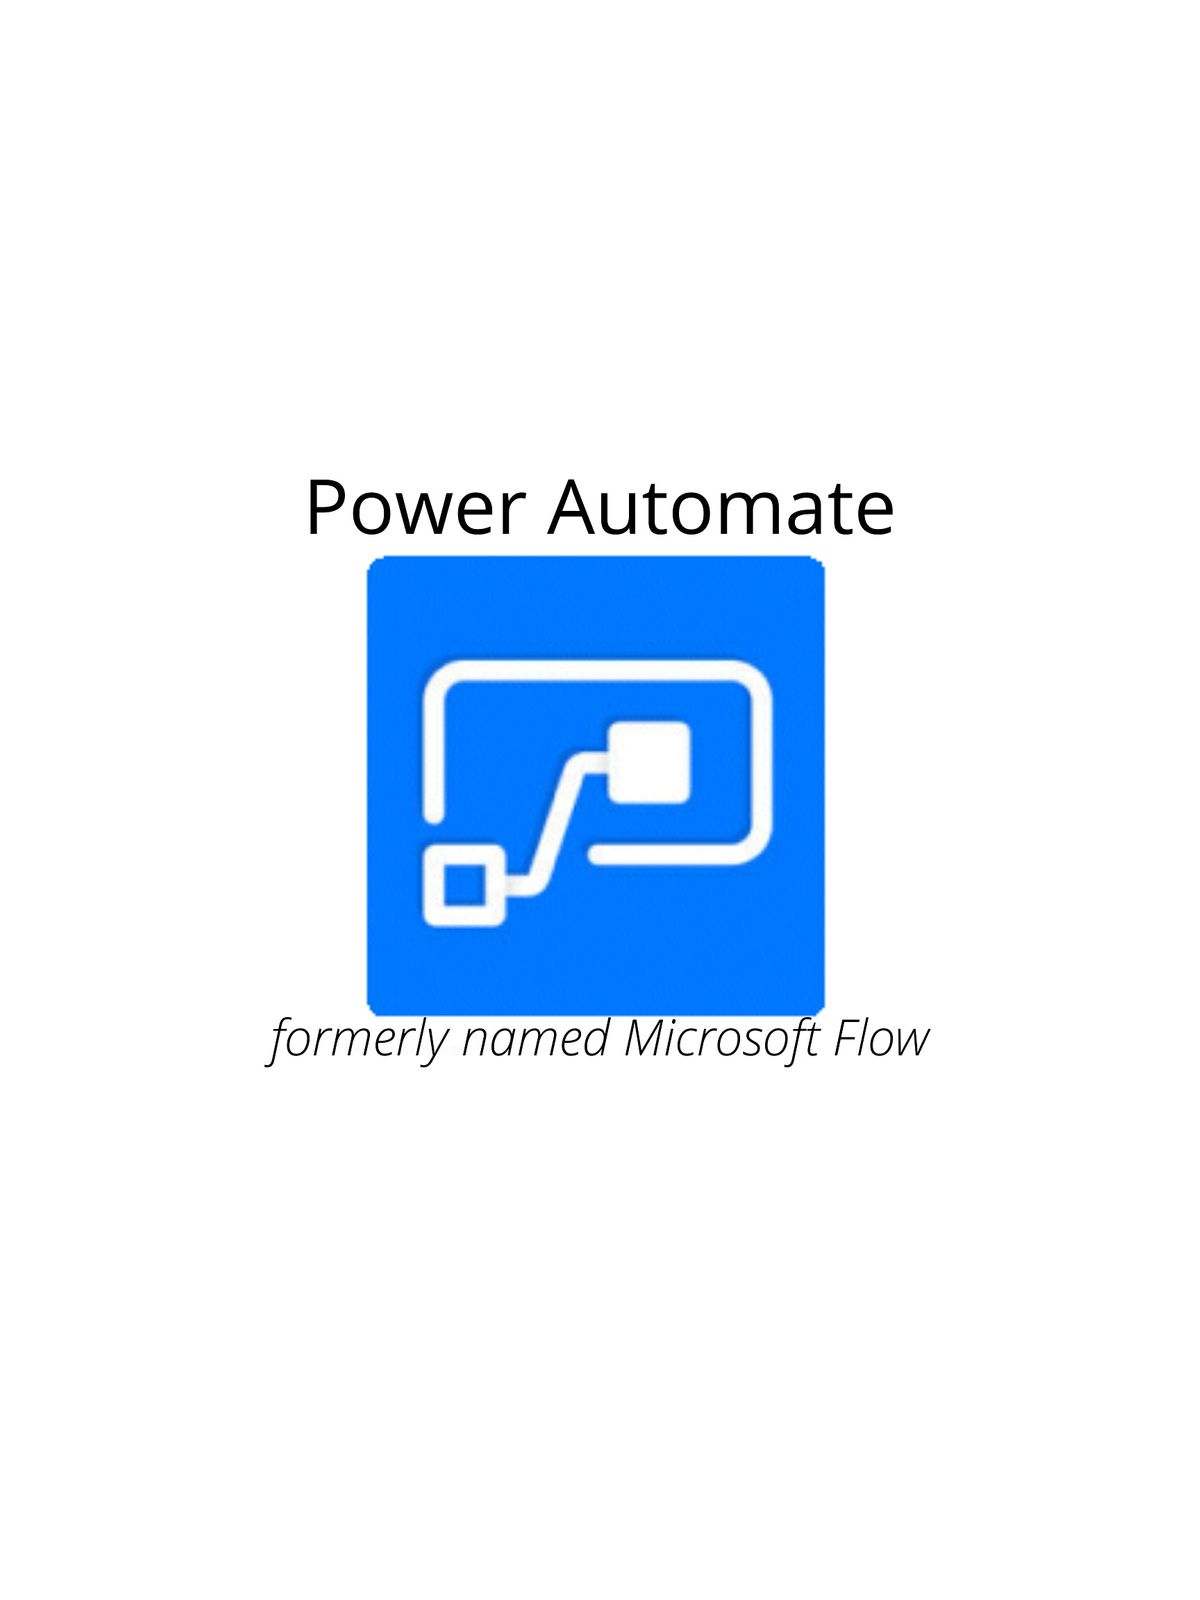 Master Power Automate in 4 weekends training course in Paris